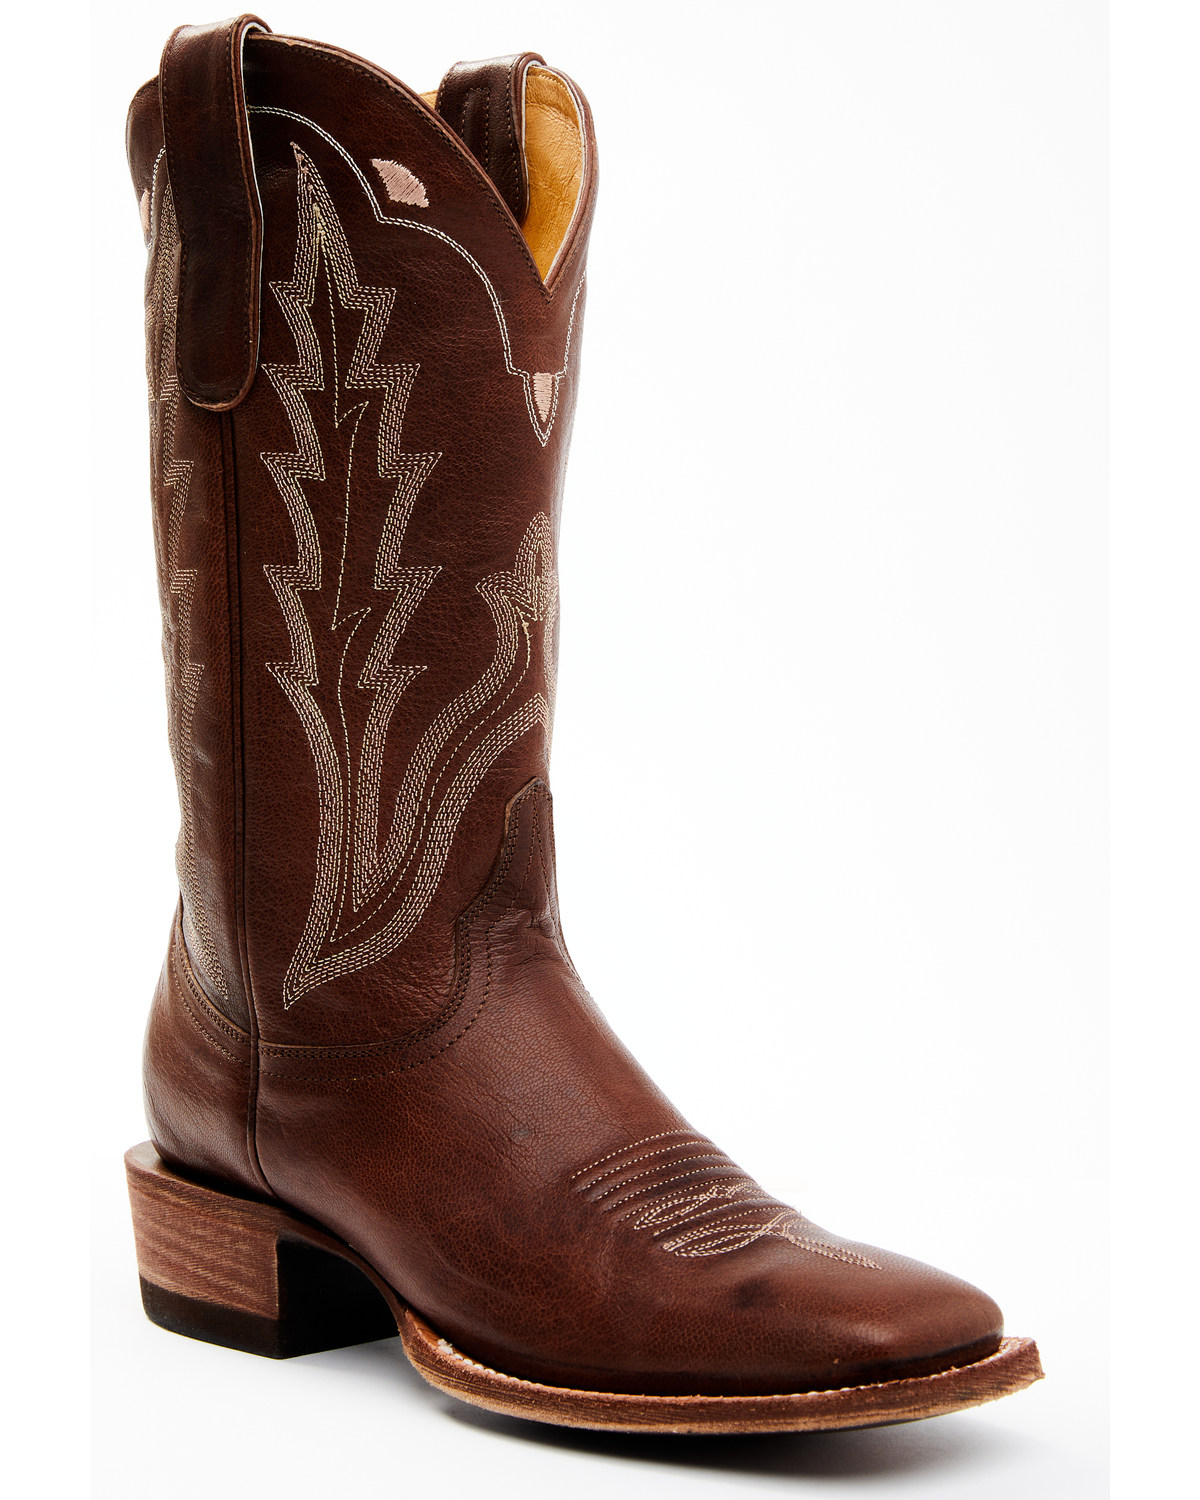 Idyllwind Women's Outlaw Whiskey Performance Leather Western Boot - Broad Square Toe